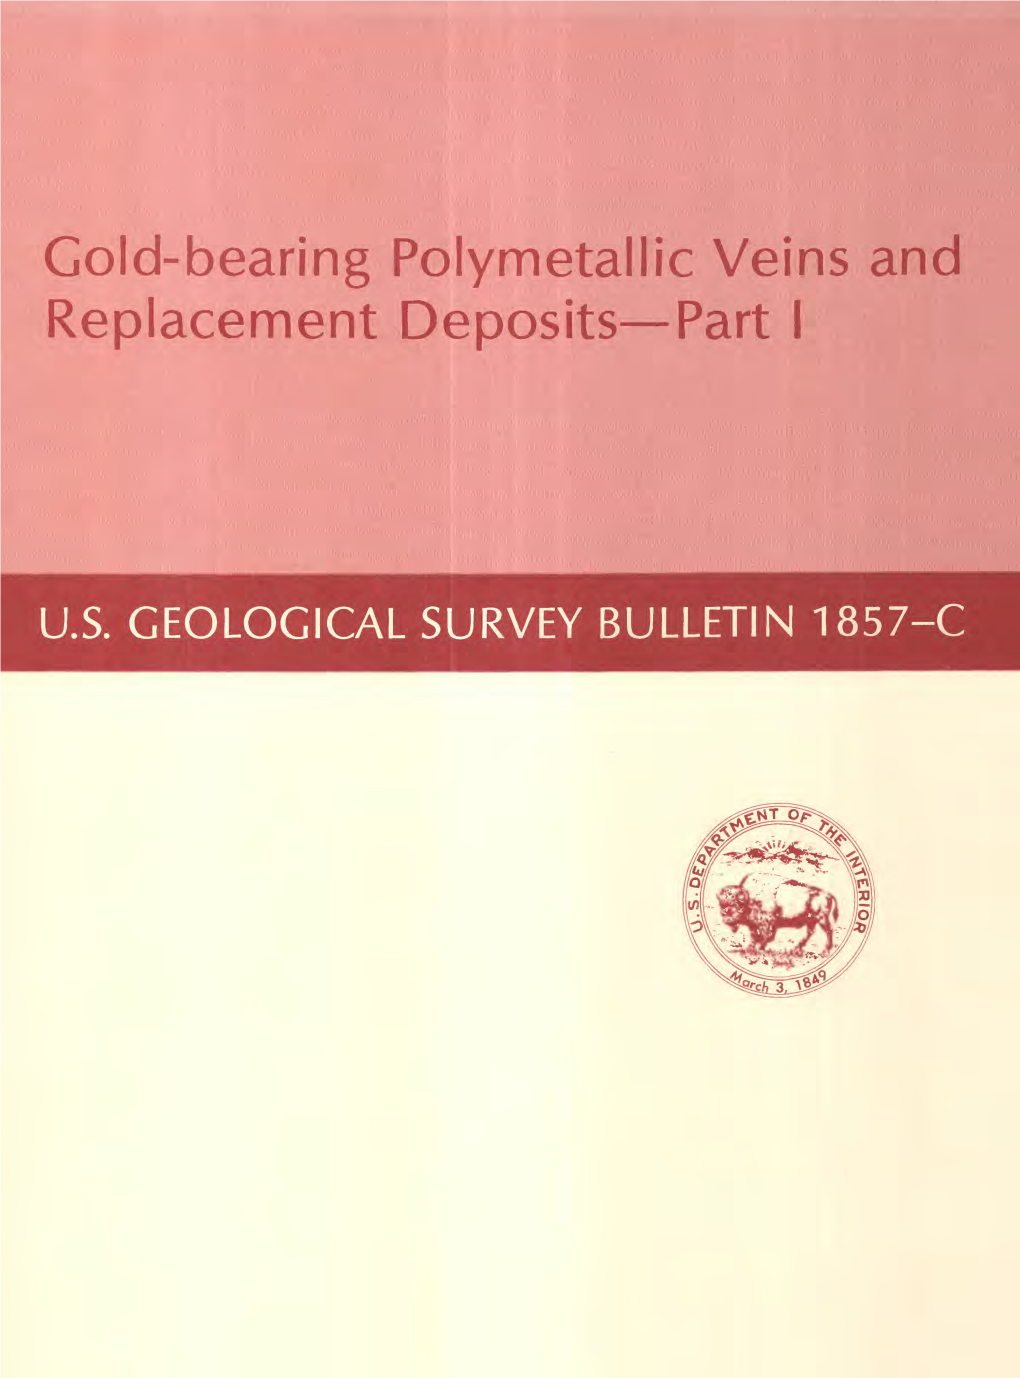 Gold-Bearing Polymetallic Veins and Replacement Deposits Part I